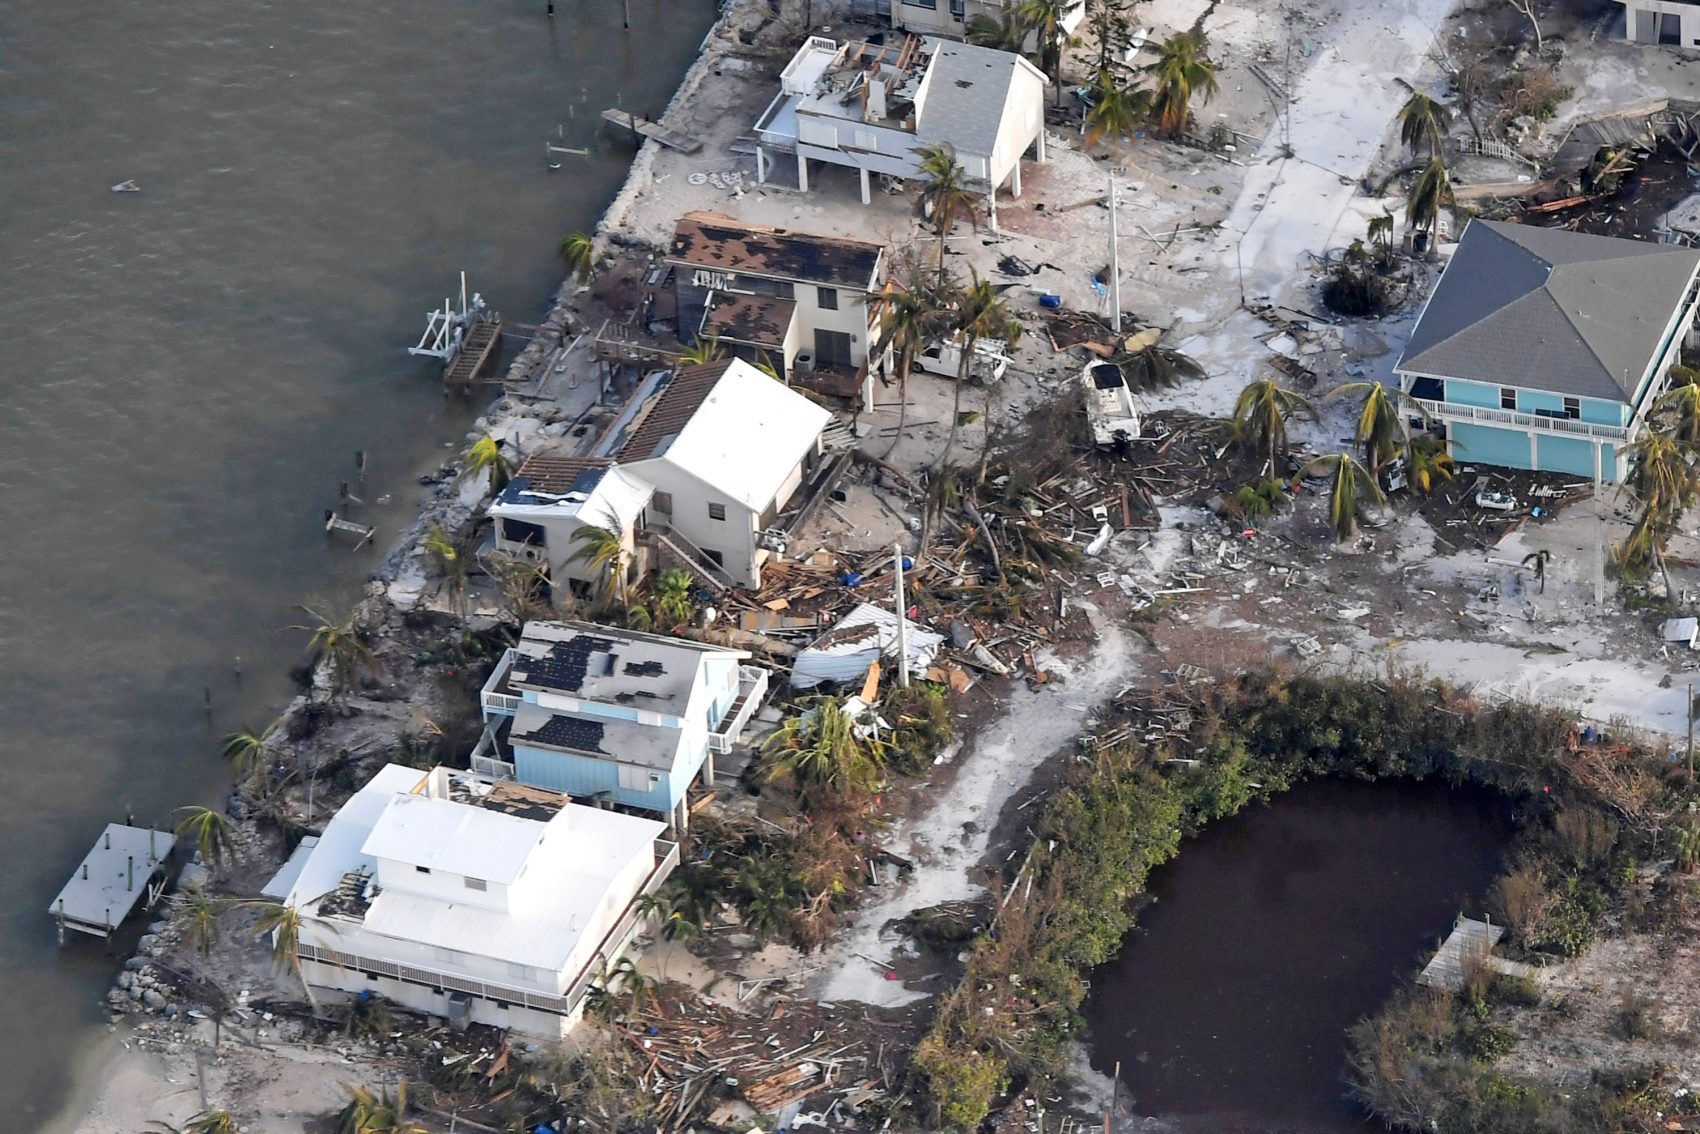 Damaged houses are seen in the aftermath of Hurricane Irma on Sept. 11, 2017 over the Florida Keys, Fla. (Matt McClain -Pool/Getty Images)